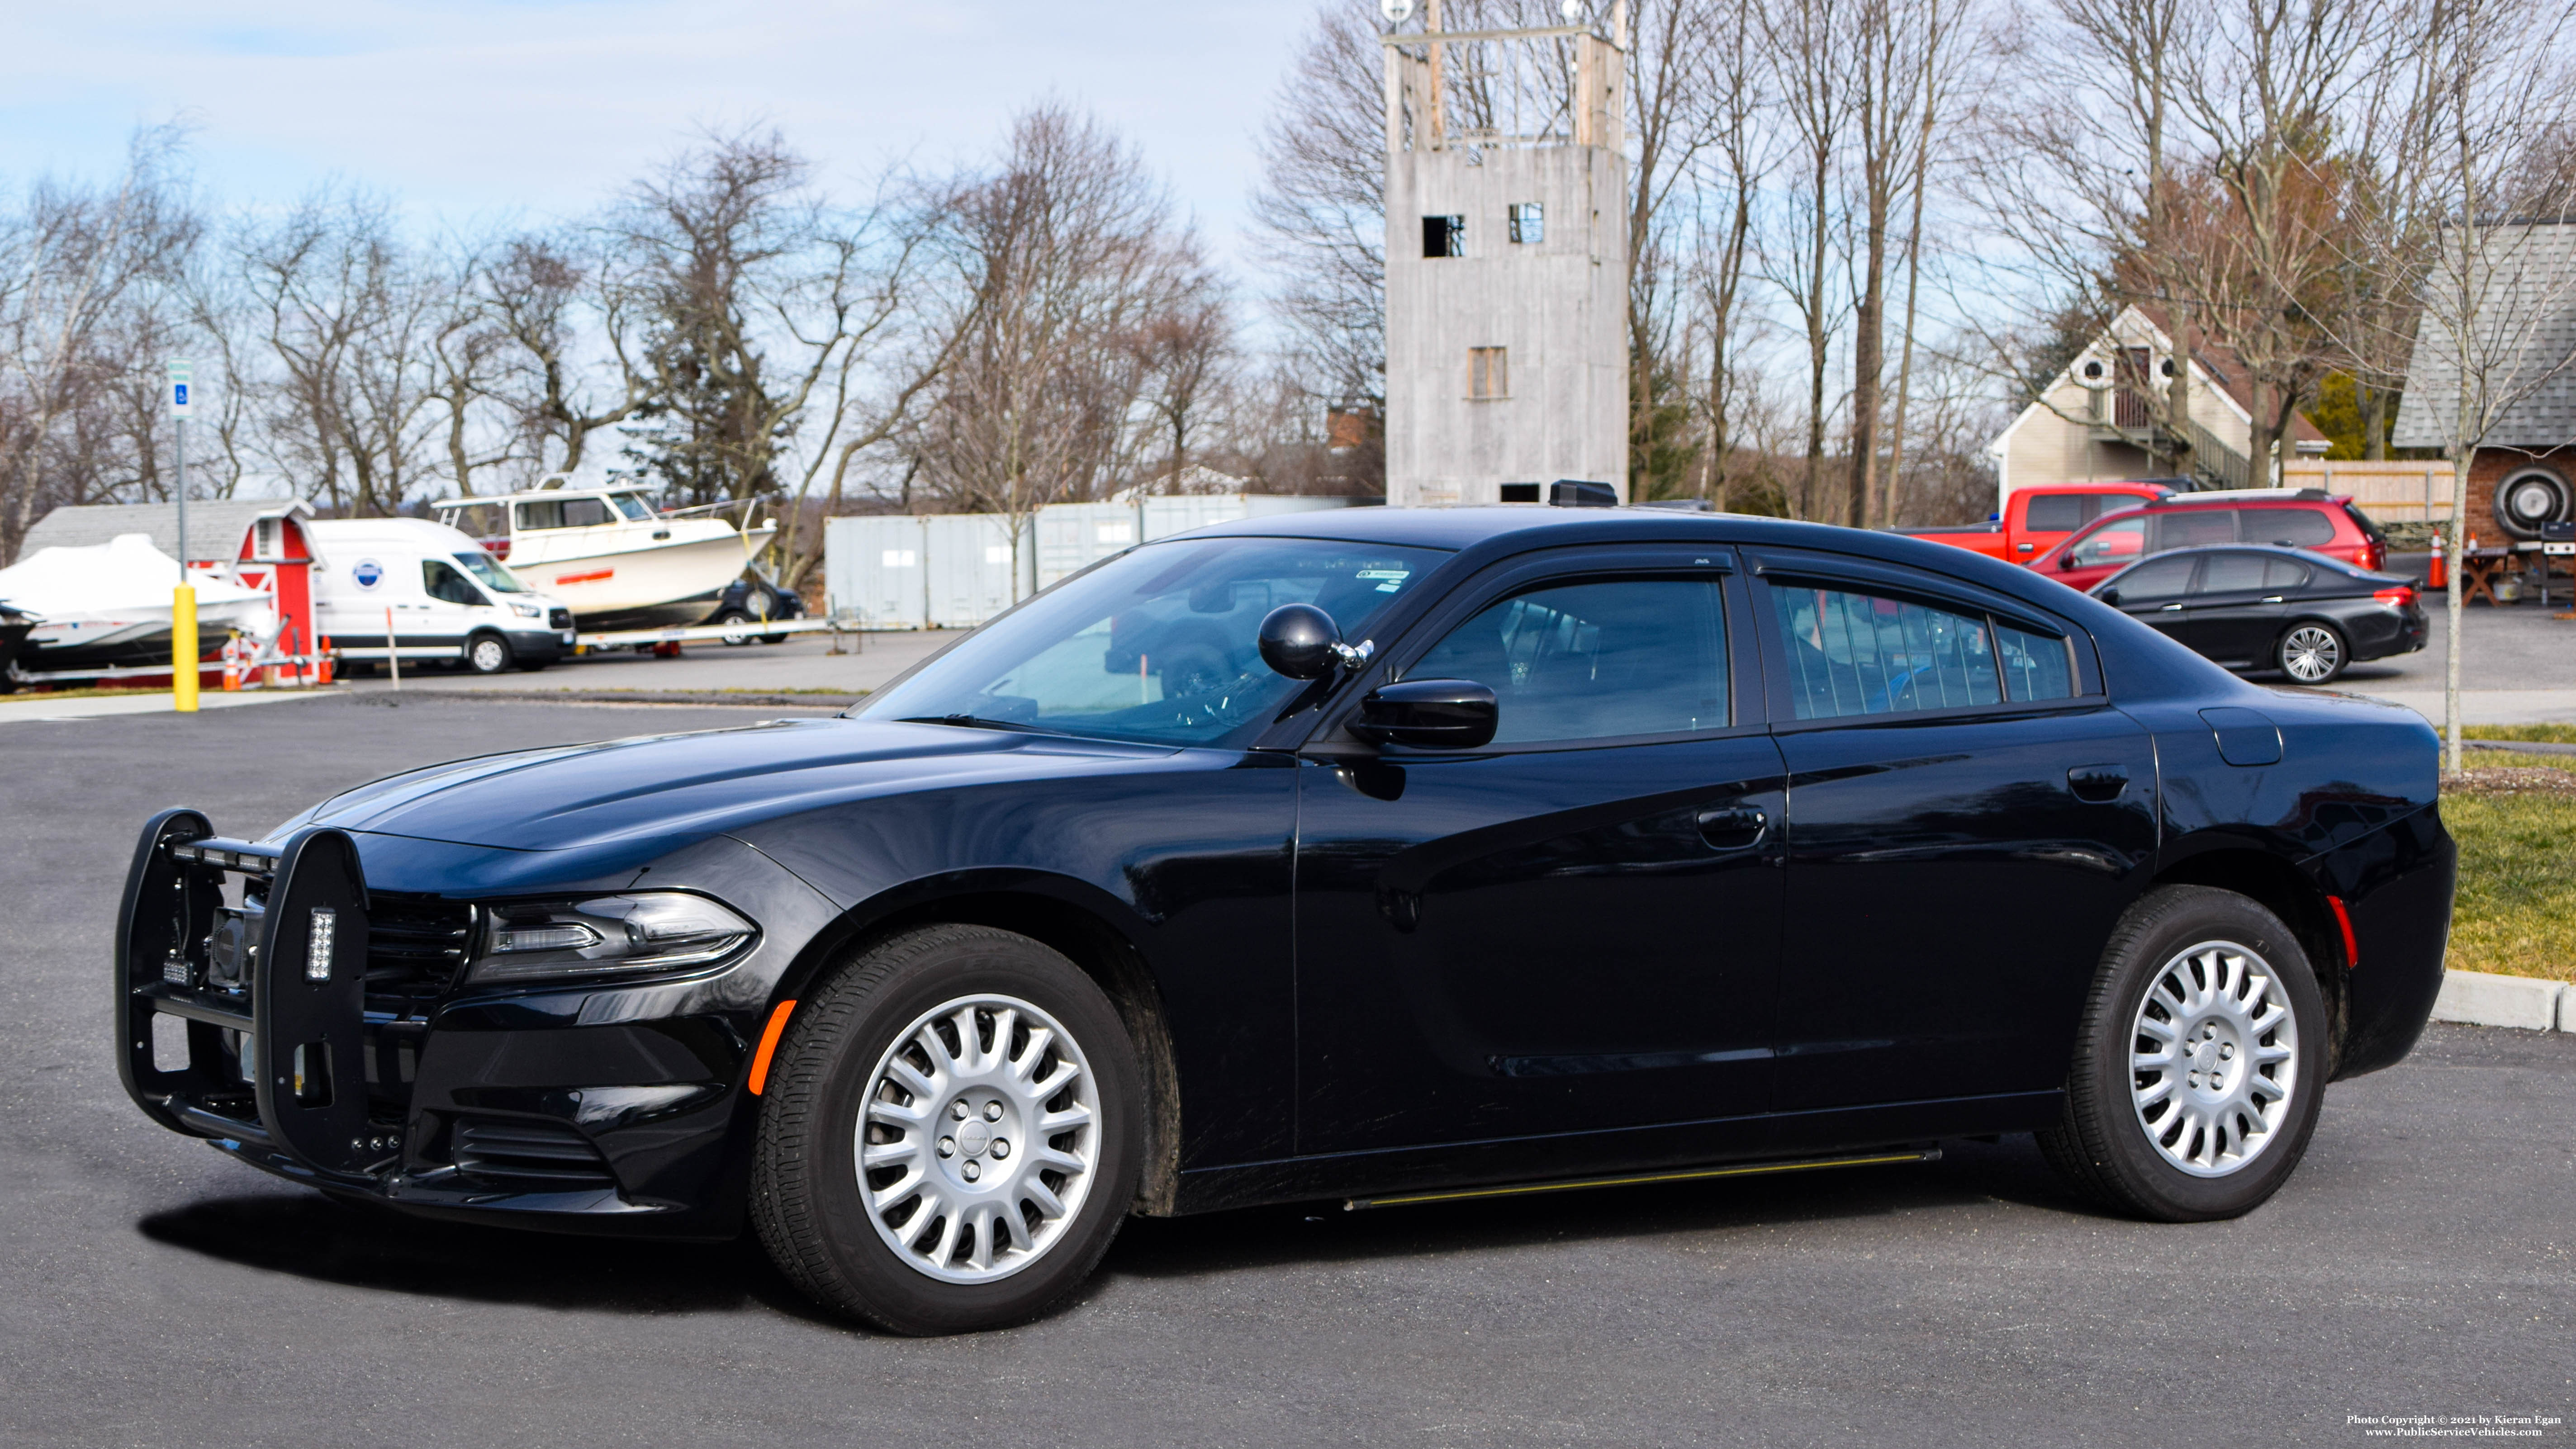 A photo  of Portsmouth Police
            Unmarked Unit, a 2019 Dodge Charger             taken by Kieran Egan